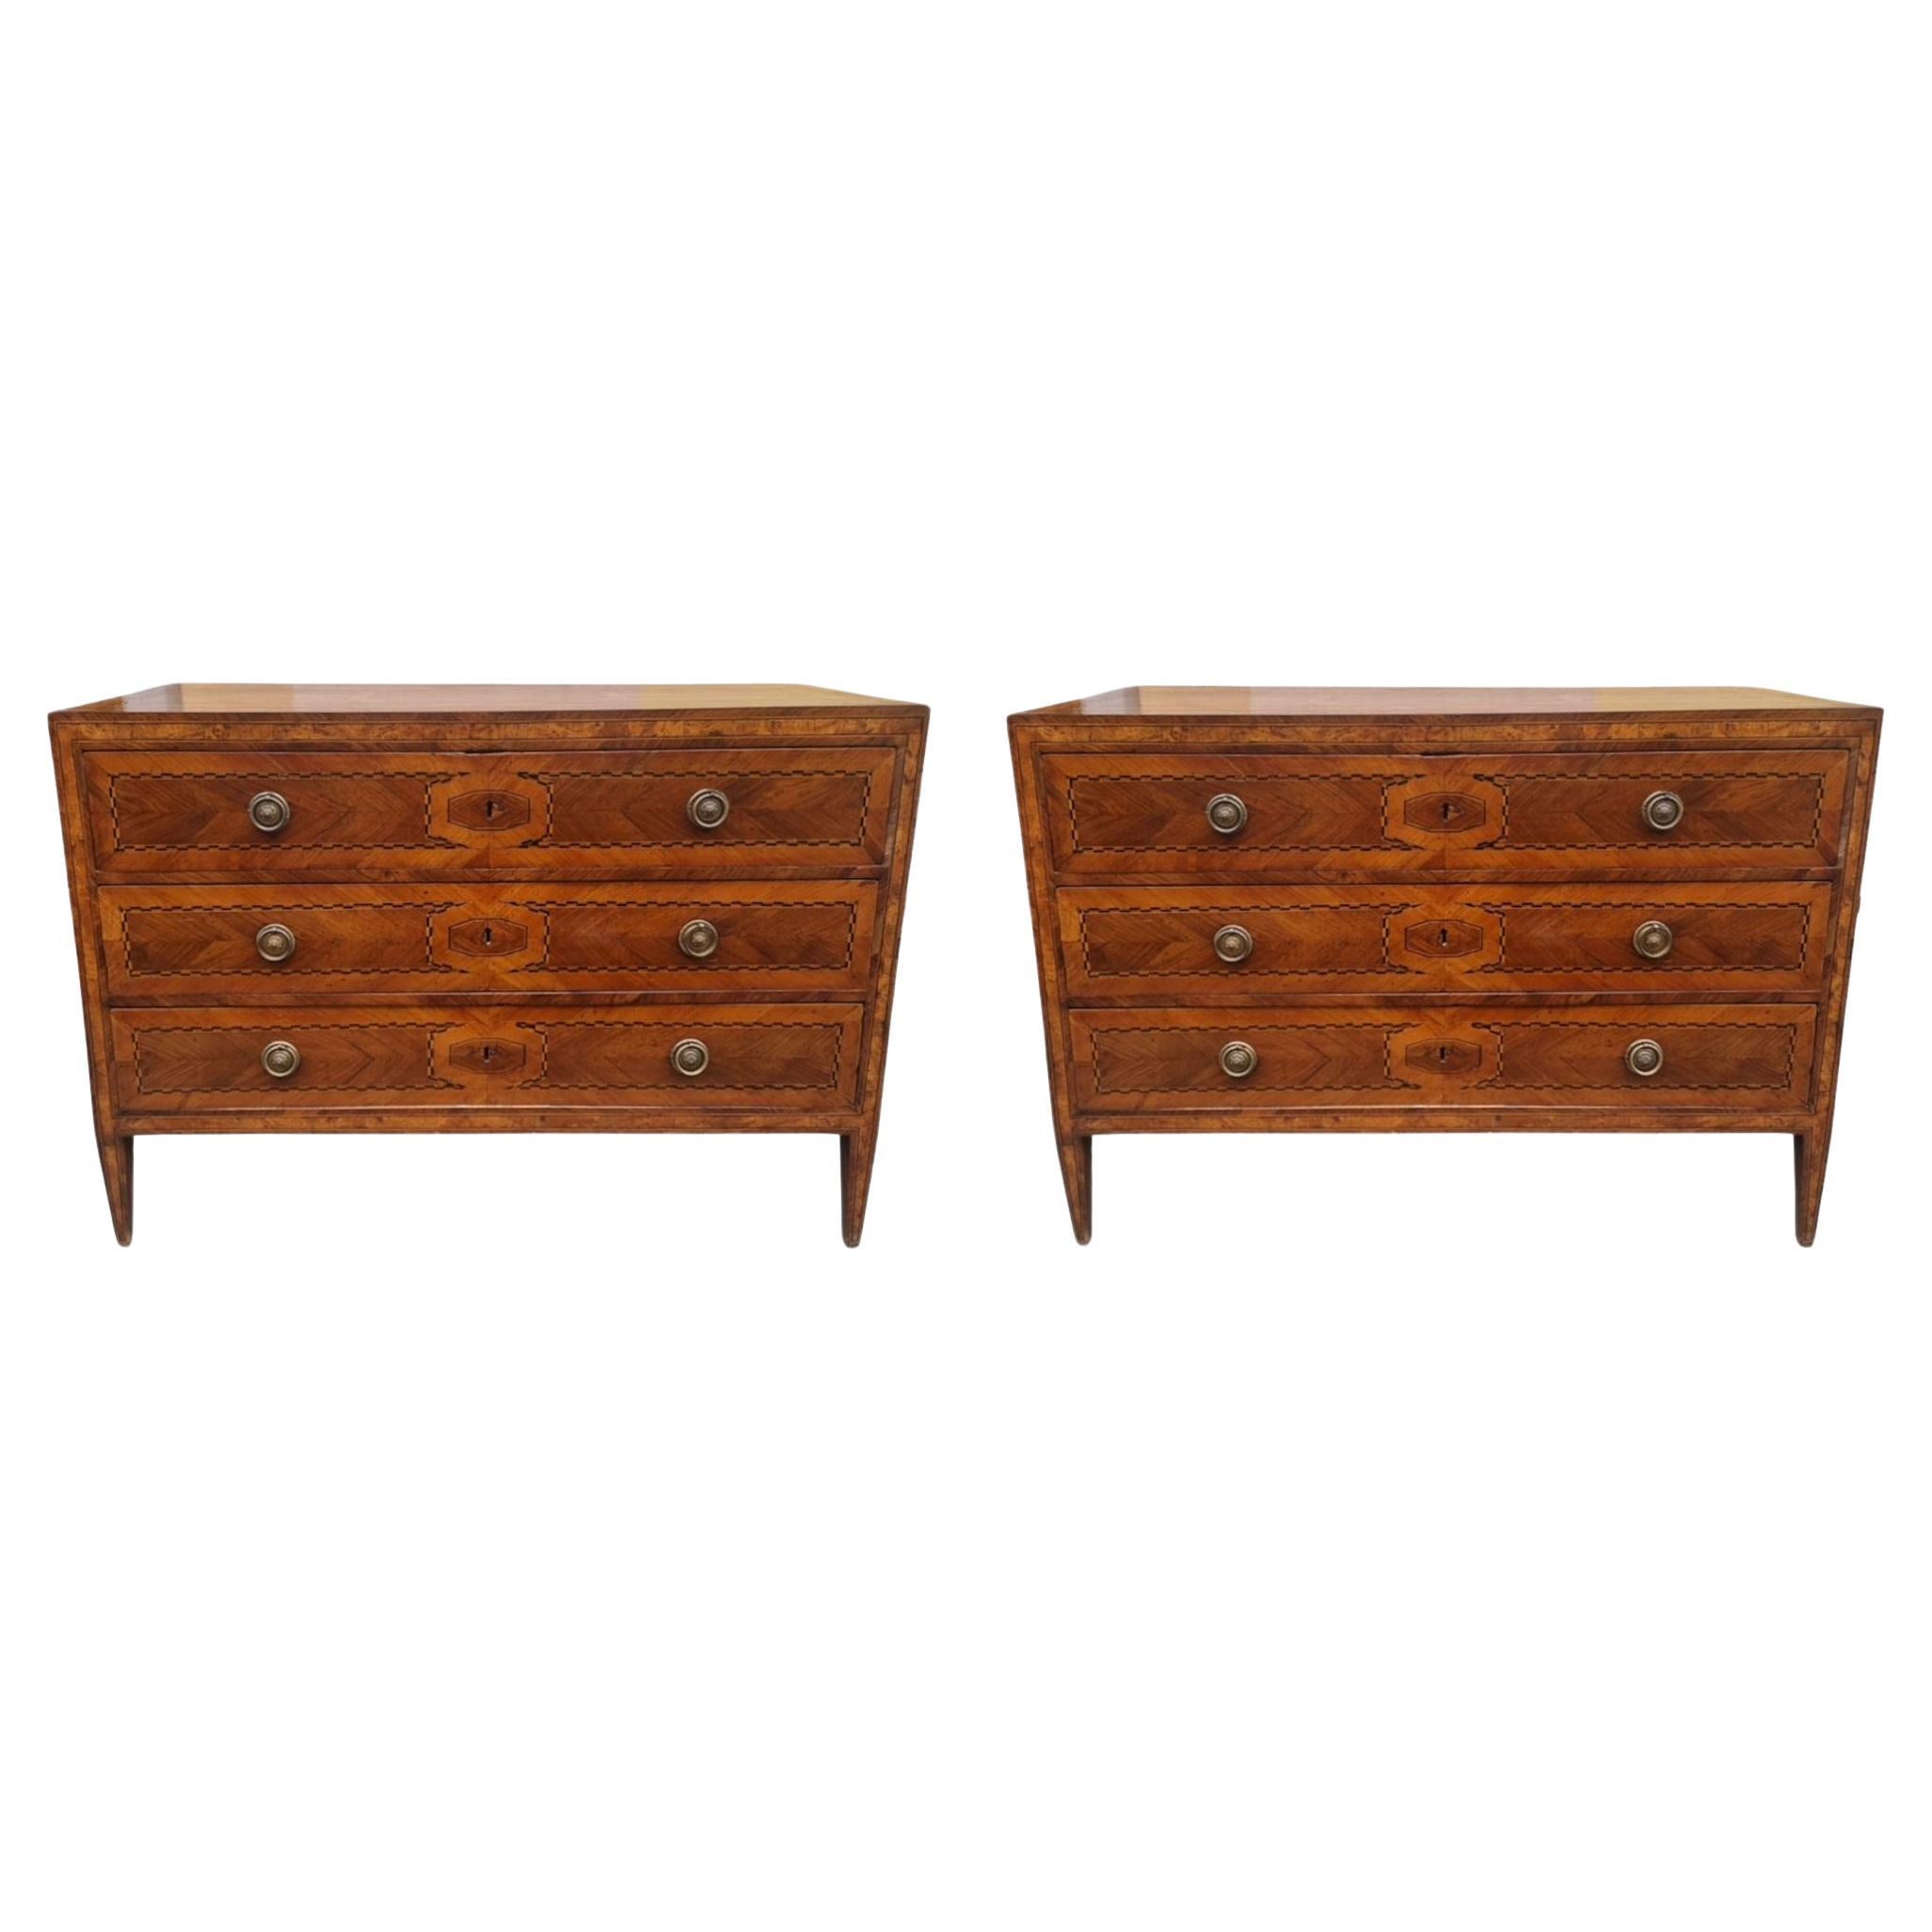  Pair of Louis XVI chests of drawers For Sale